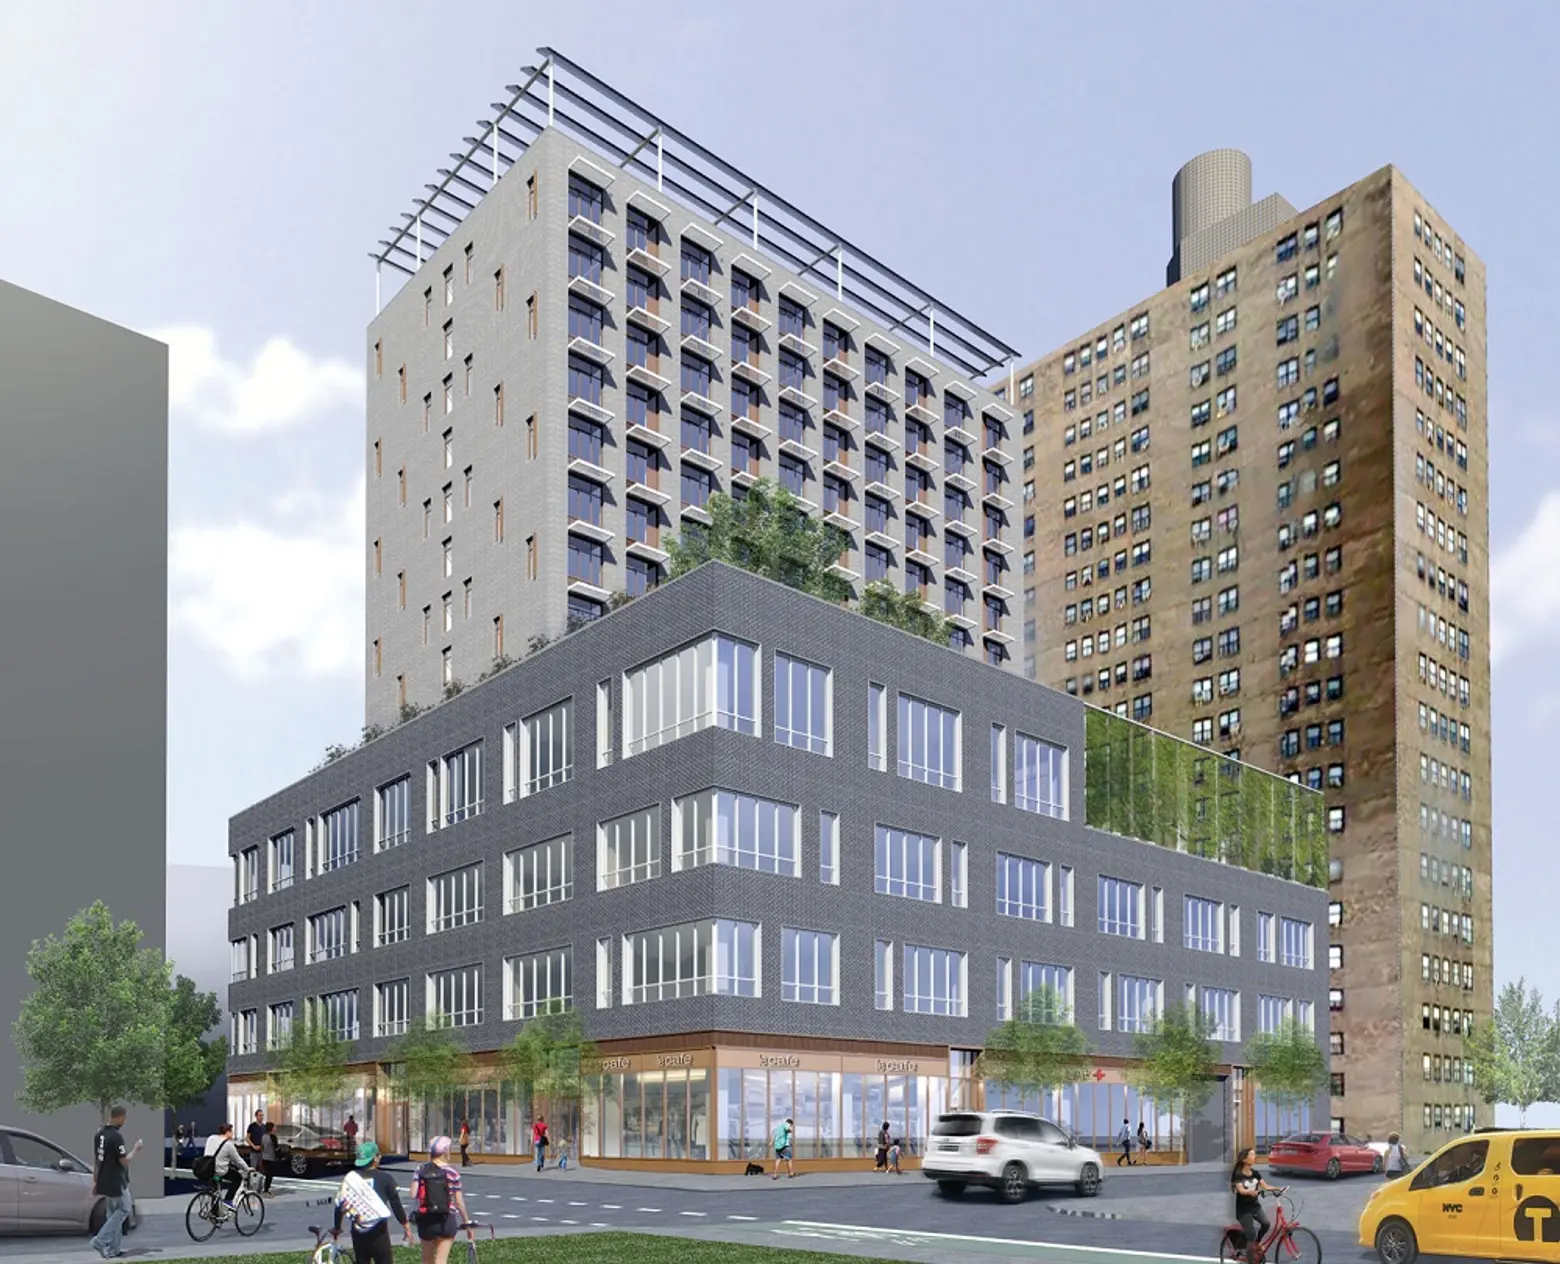 Affordable housing lottery for seniors opens at Essex Crossing, from $396/month